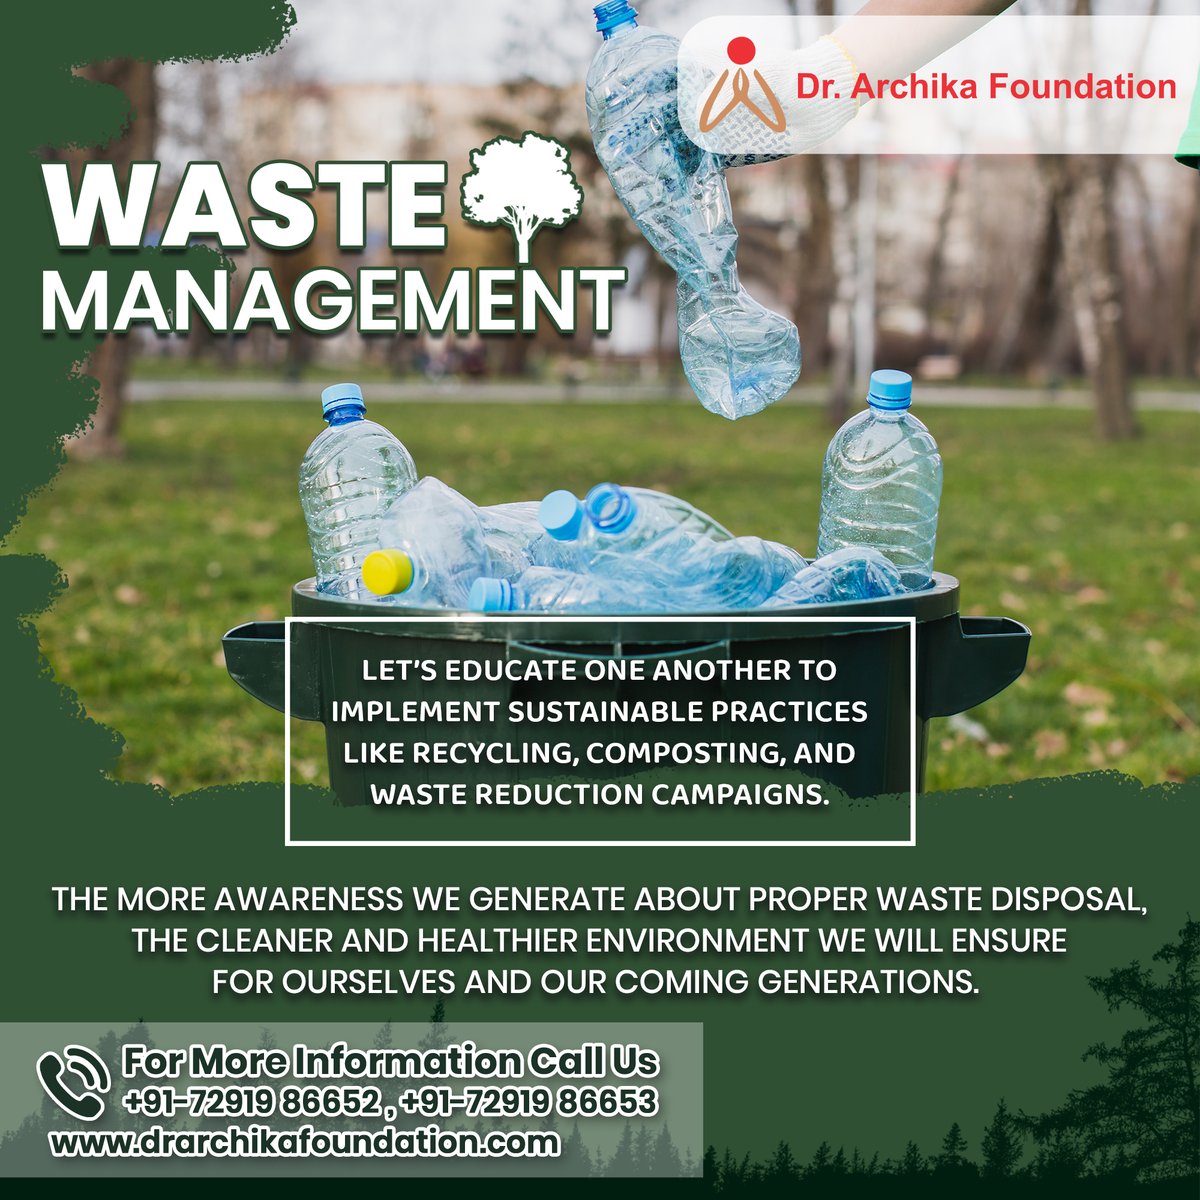 Let’s join hands on proper waste disposal to build sustainable and liveable cities.
.
Visit Official Website : drarchikafoundation.com
.
#drarchikafoundation #drarchikadidi #ngo #charity #nonprofit  #donate #volunteer #help #india #support #covid  #fundraising #socialwork